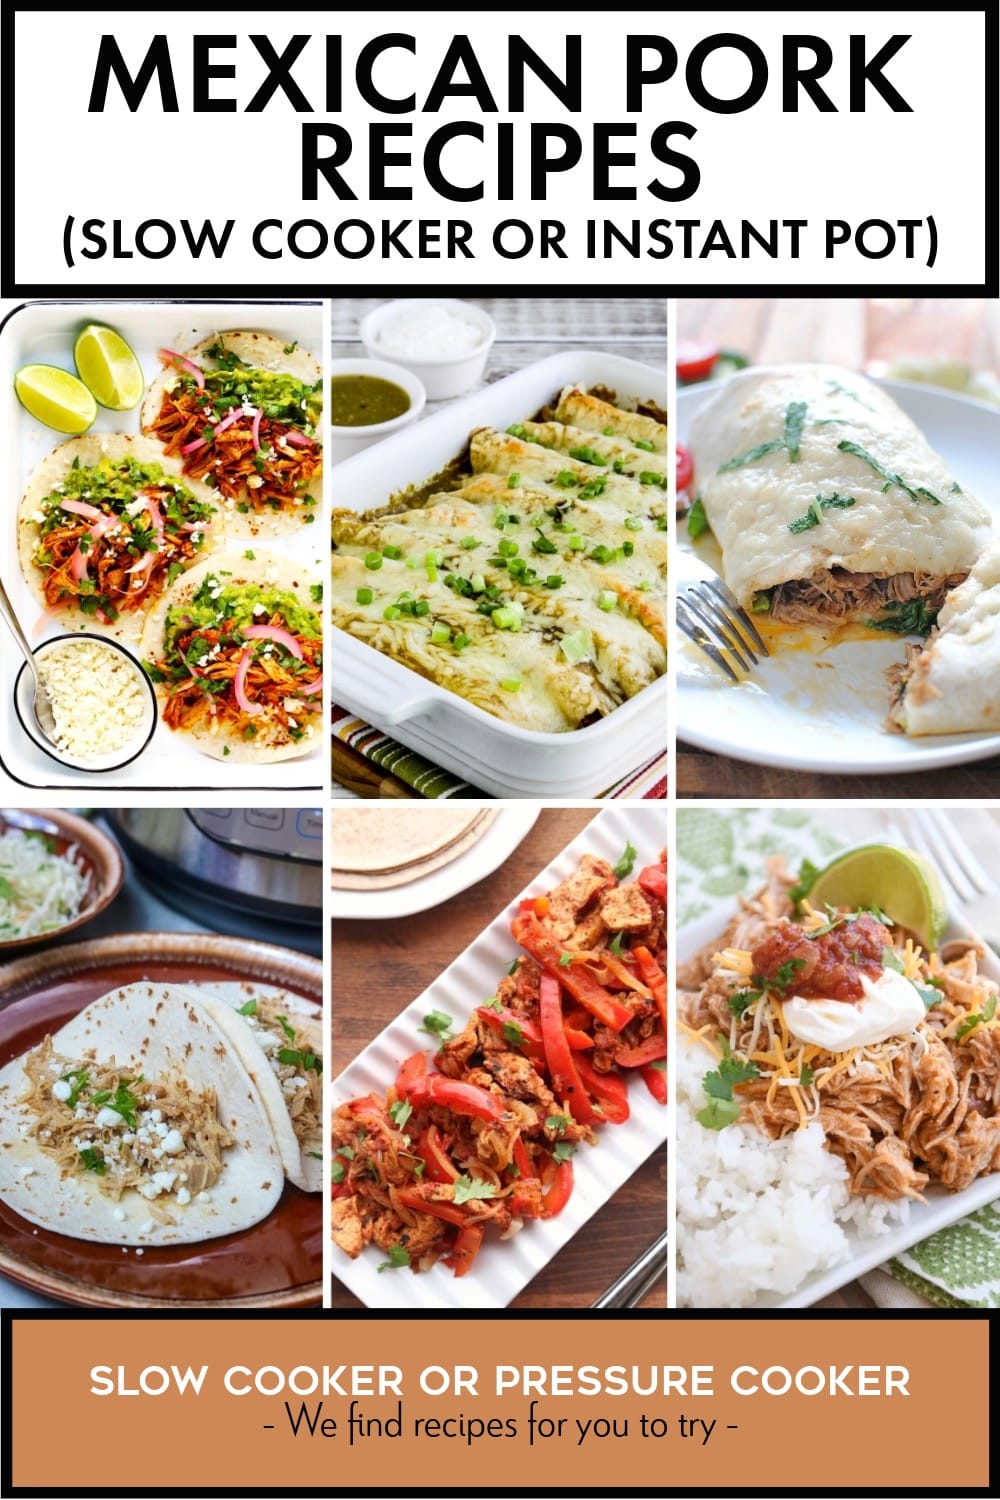 Pinterest image of Mexican Pork Recipes (Slow Cooker or Instant Pot)